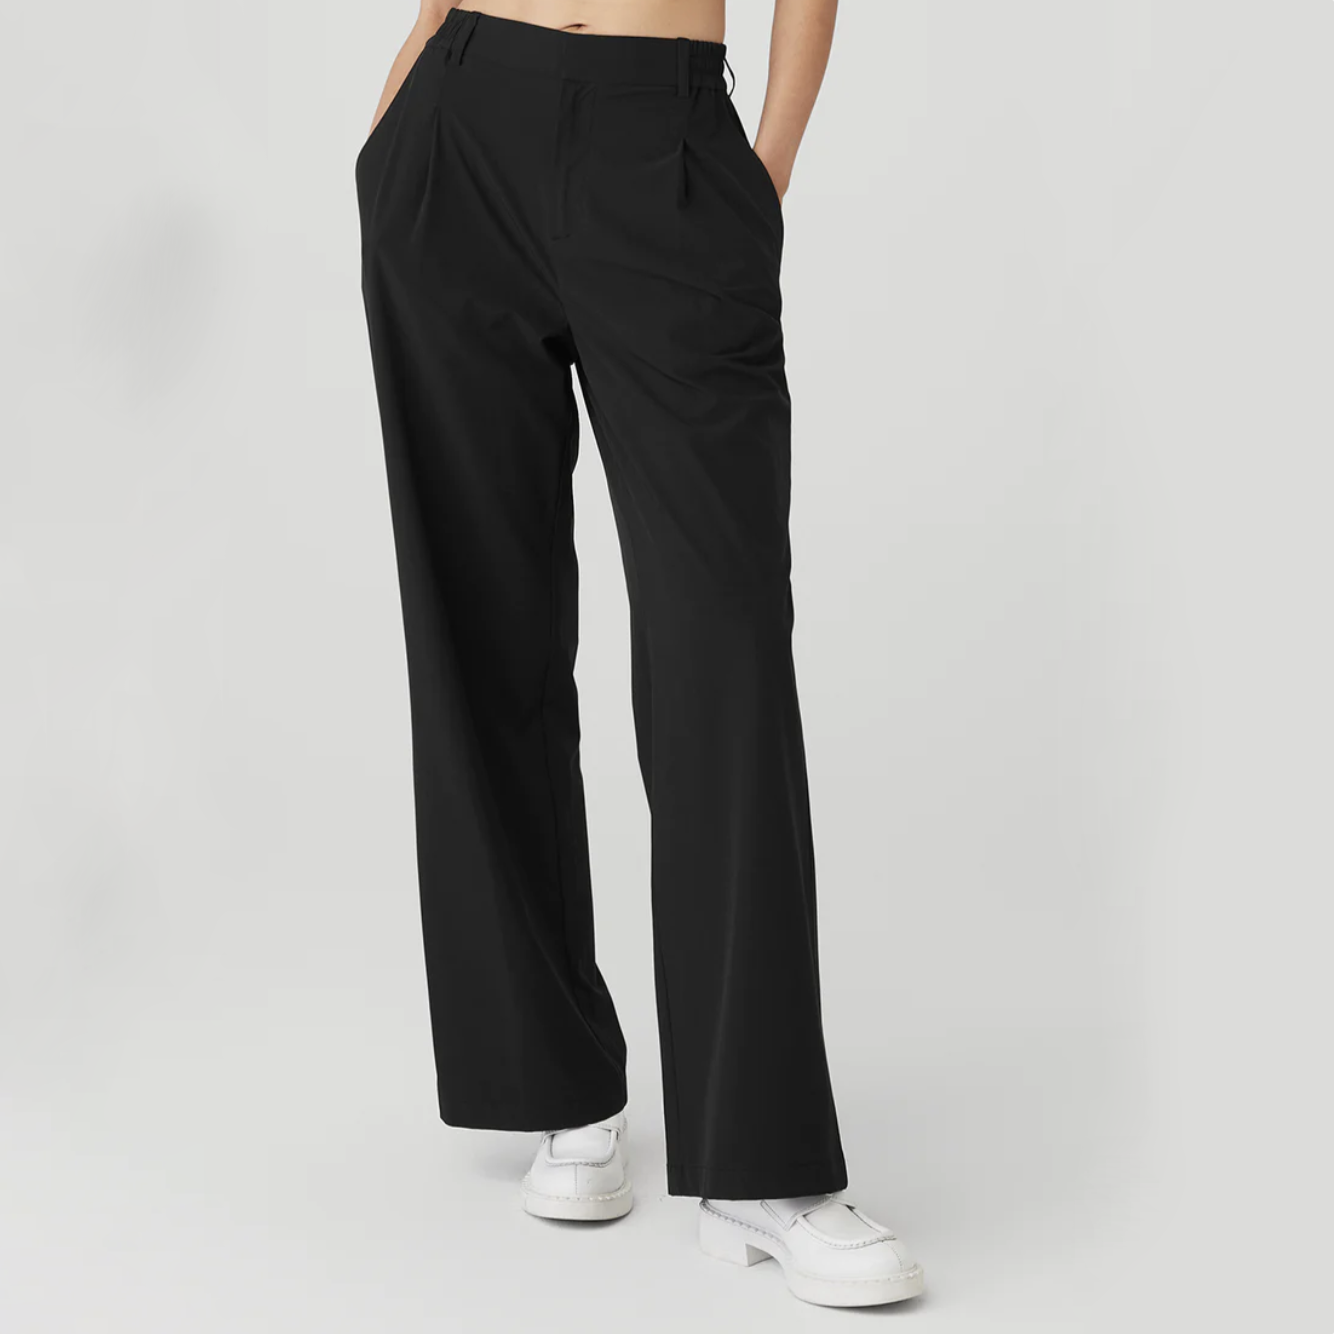 The Best Work Pants for Women, Styled 6 Ways - Later Ever After, Blog | Best  work pants, Pants for women, Fashion pants